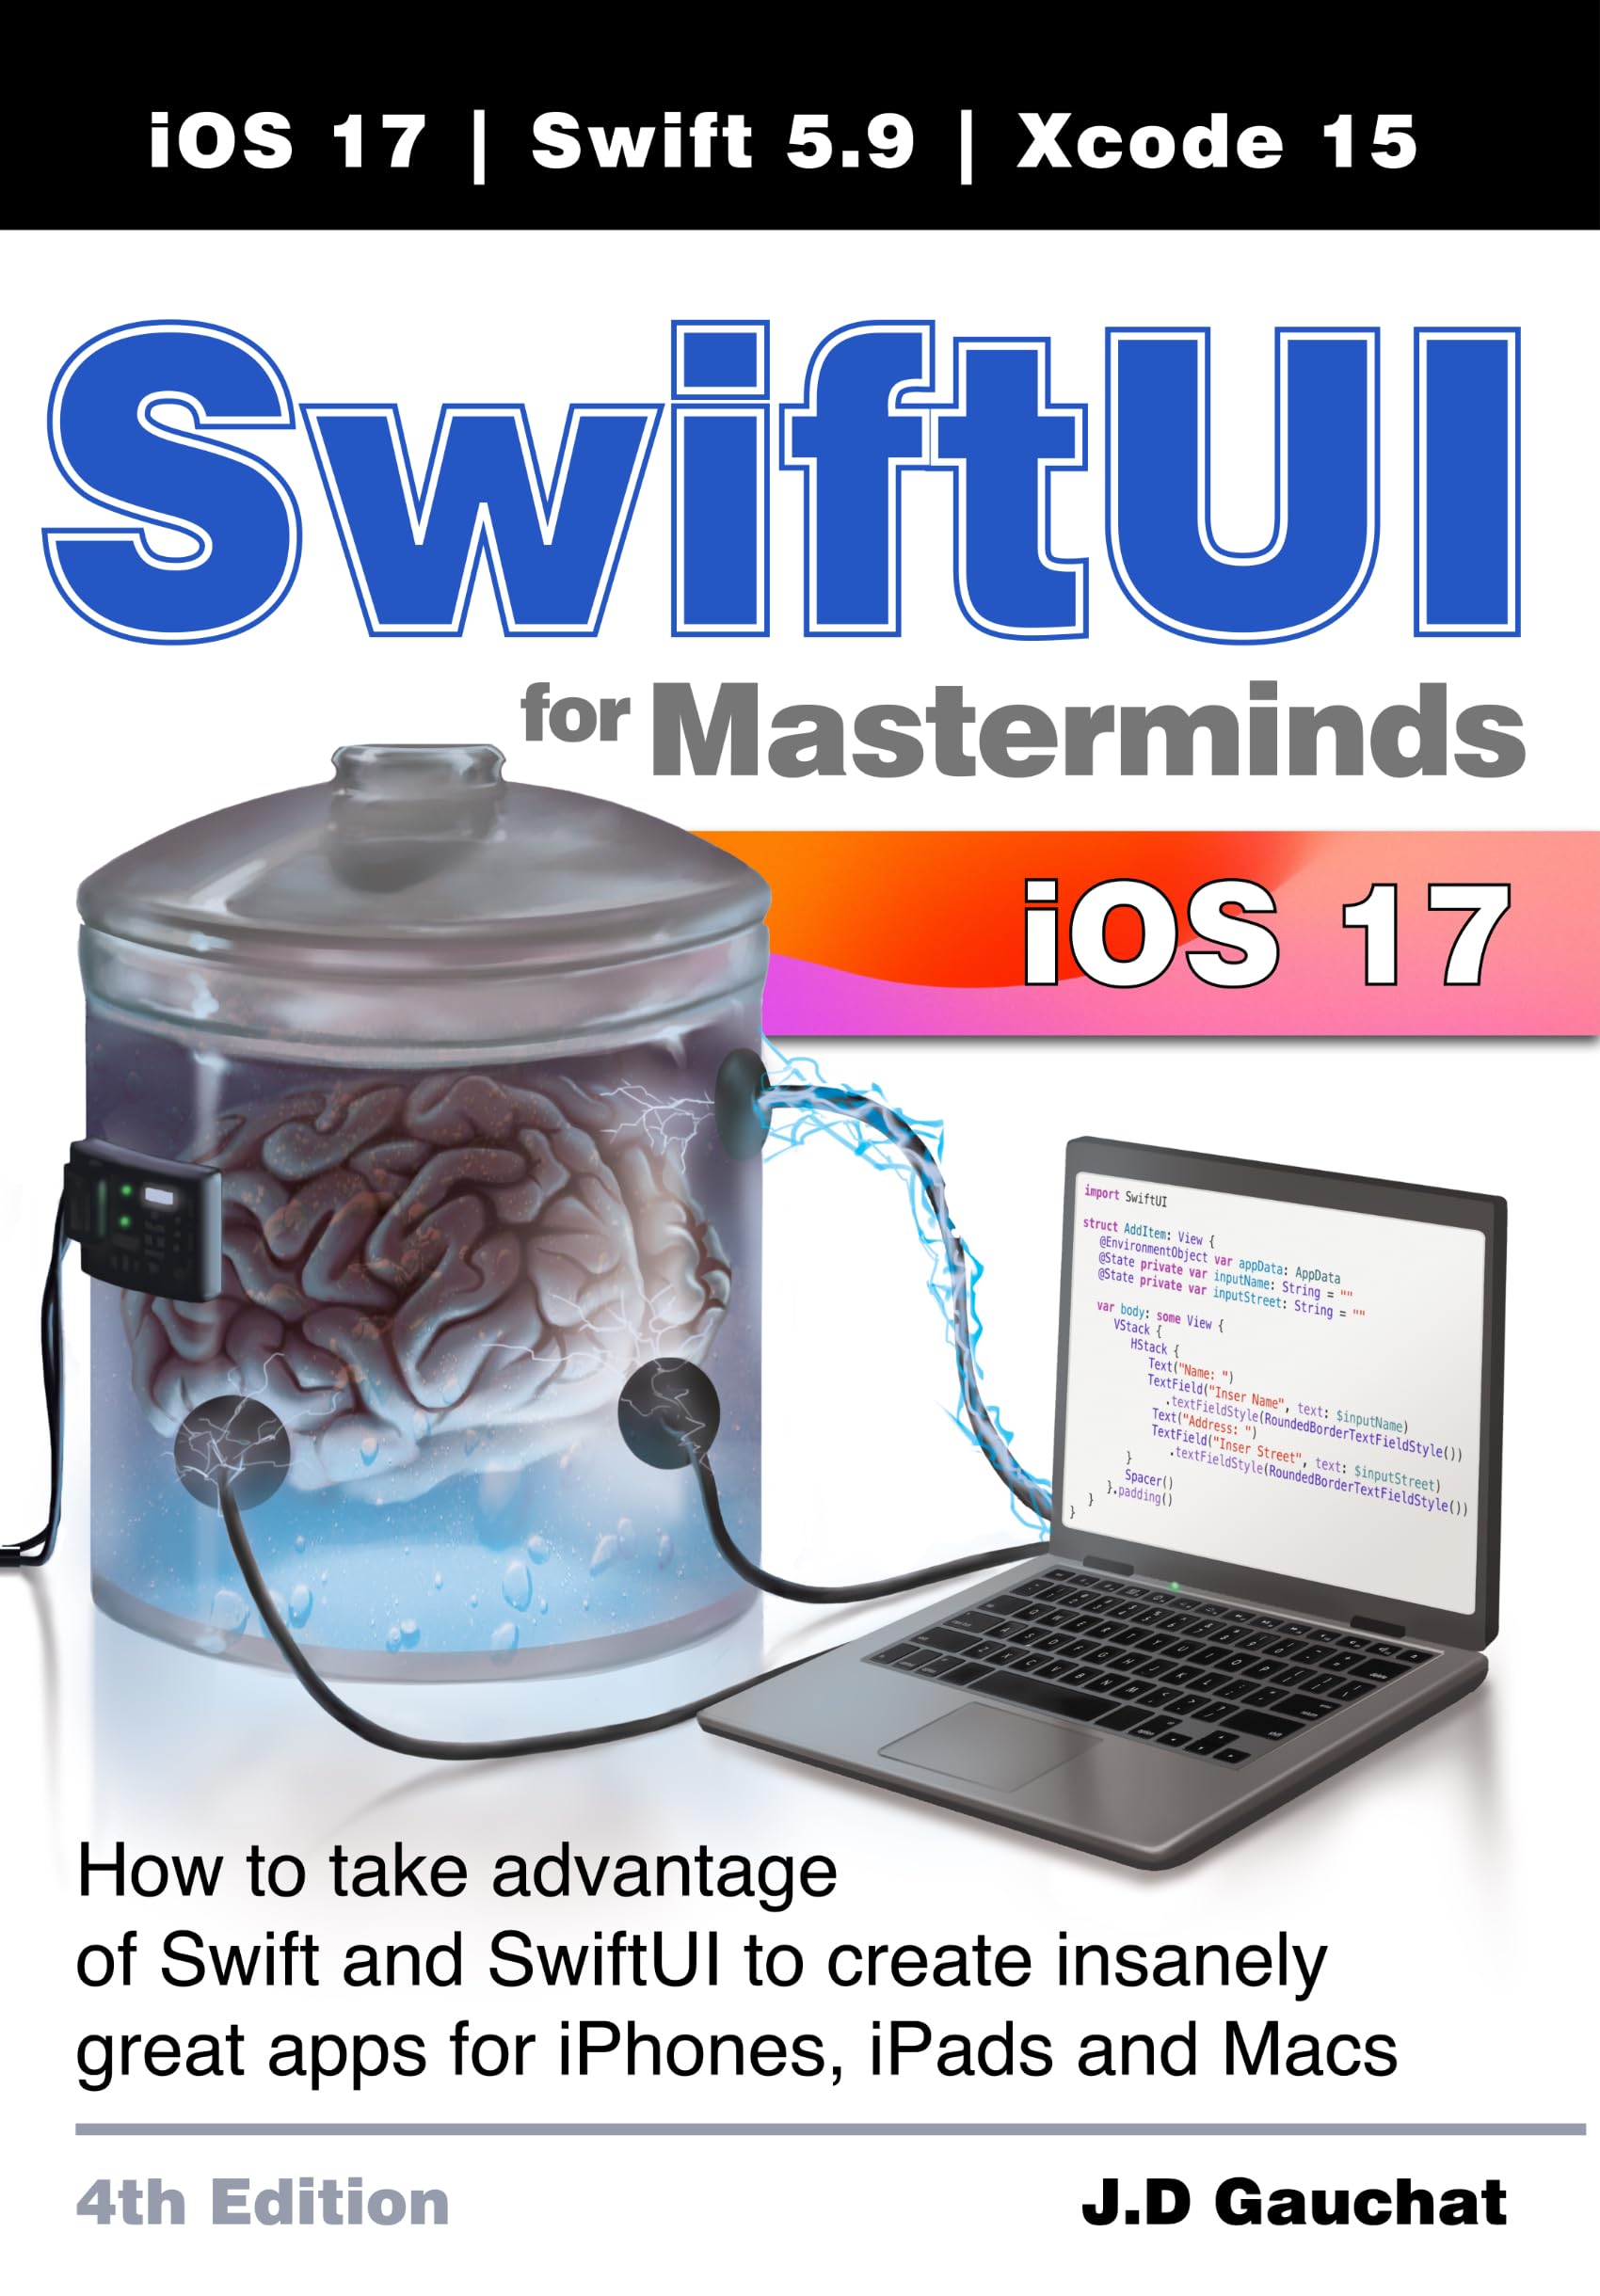 SwiftUI for Masterminds 4th Edition: How to take advantage of Swift and SwiftUI to create insanely great apps for iPhones, iPads, and Macs